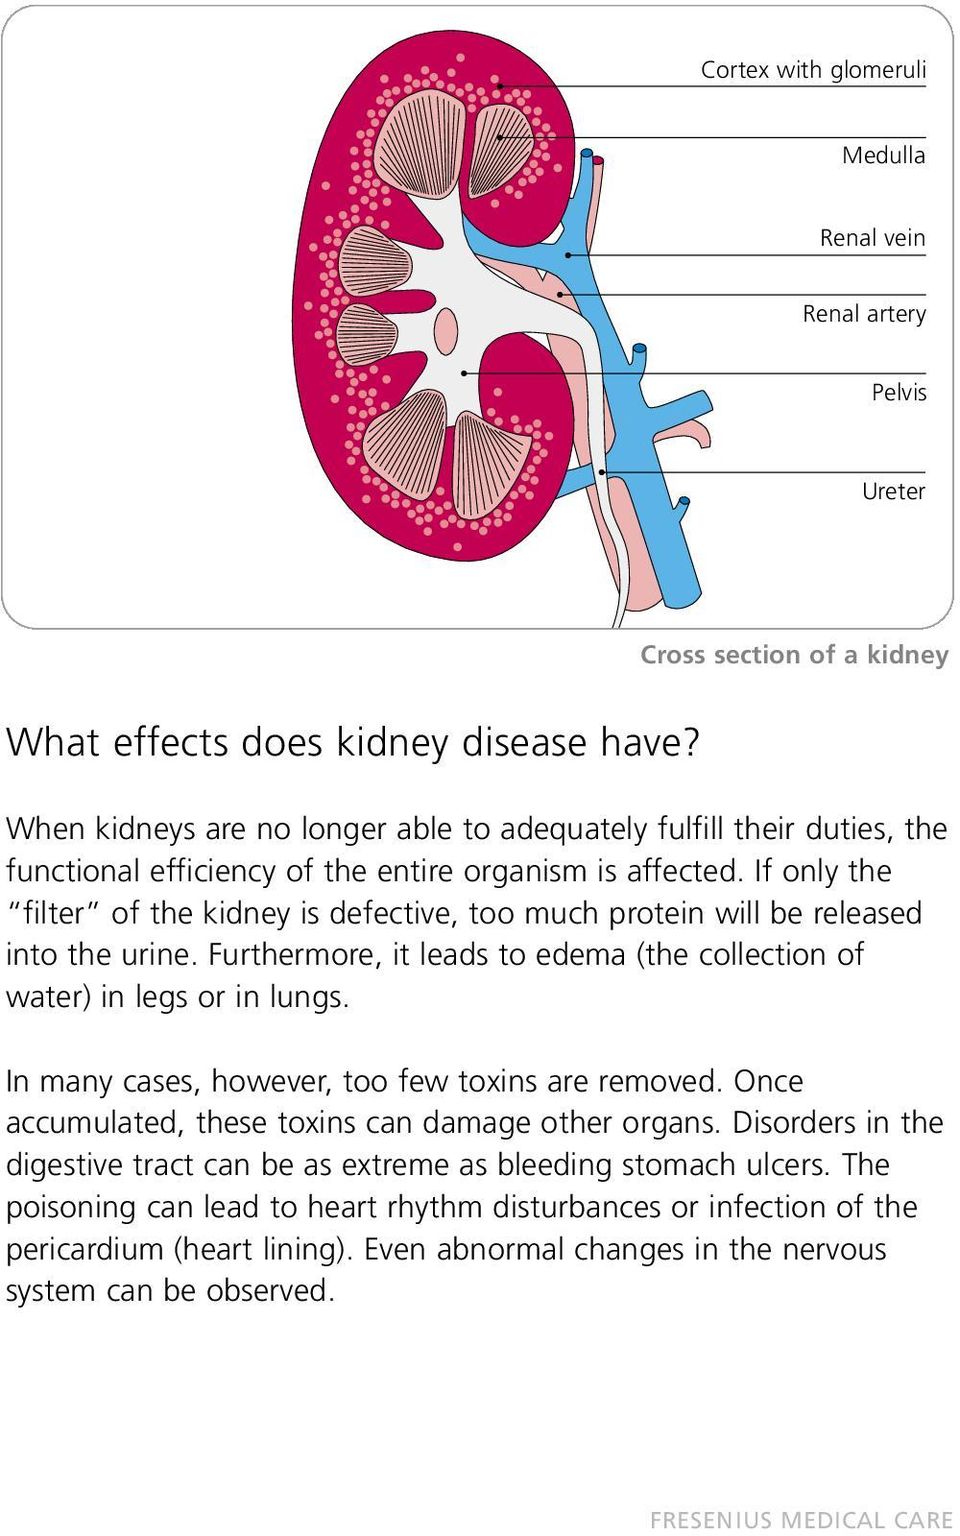 If only the filter of the kidney is defective, too much protein will be released into the urine. Furthermore, it leads to edema (the collection of water) in legs or in lungs.